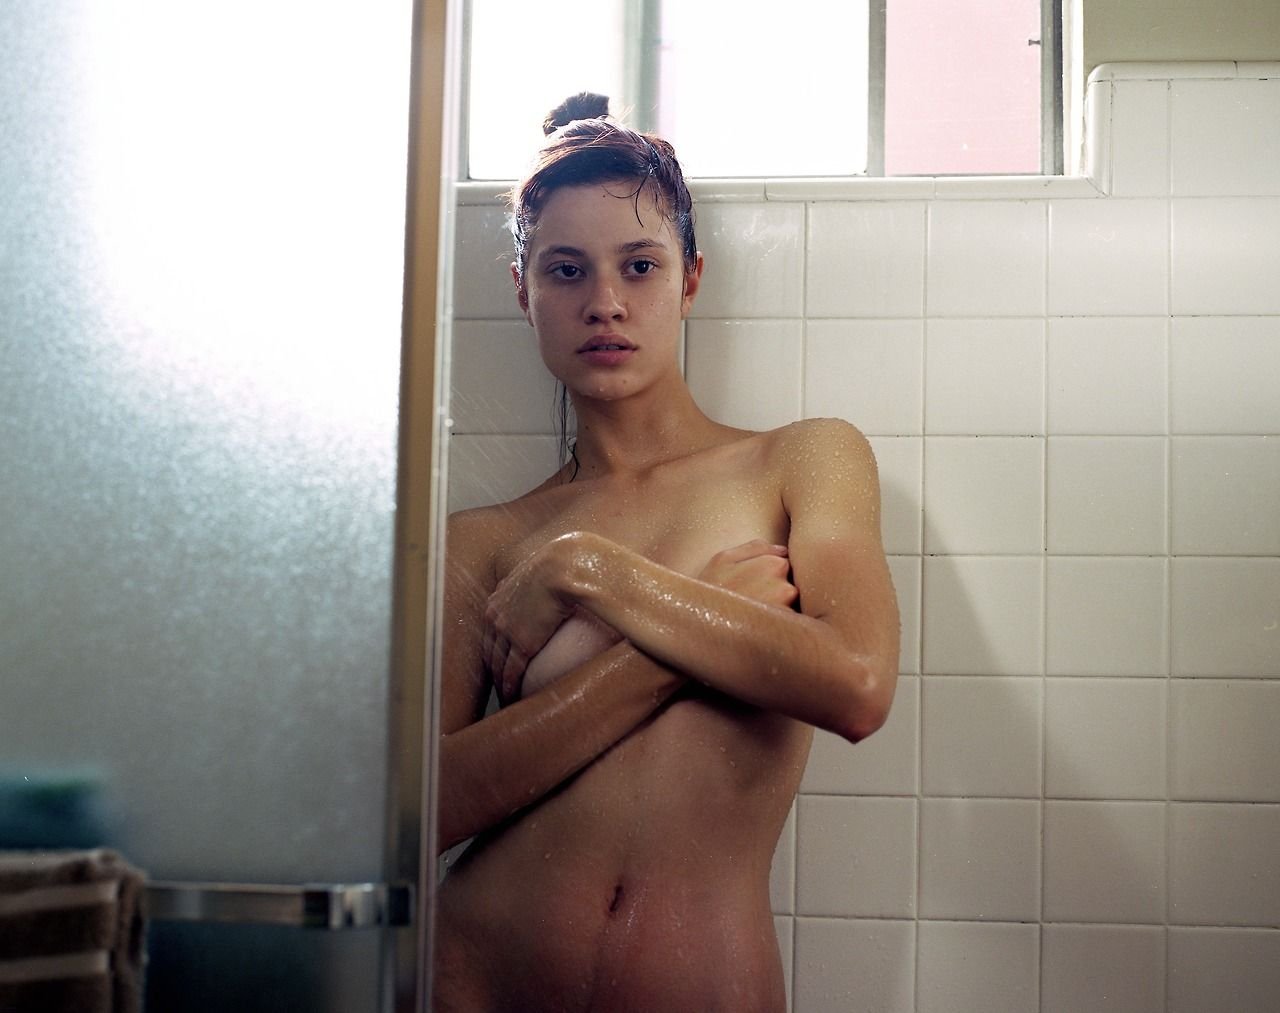 Instagram. →. Here are nude photos of Ella Weisskamp photographed by Aris J...